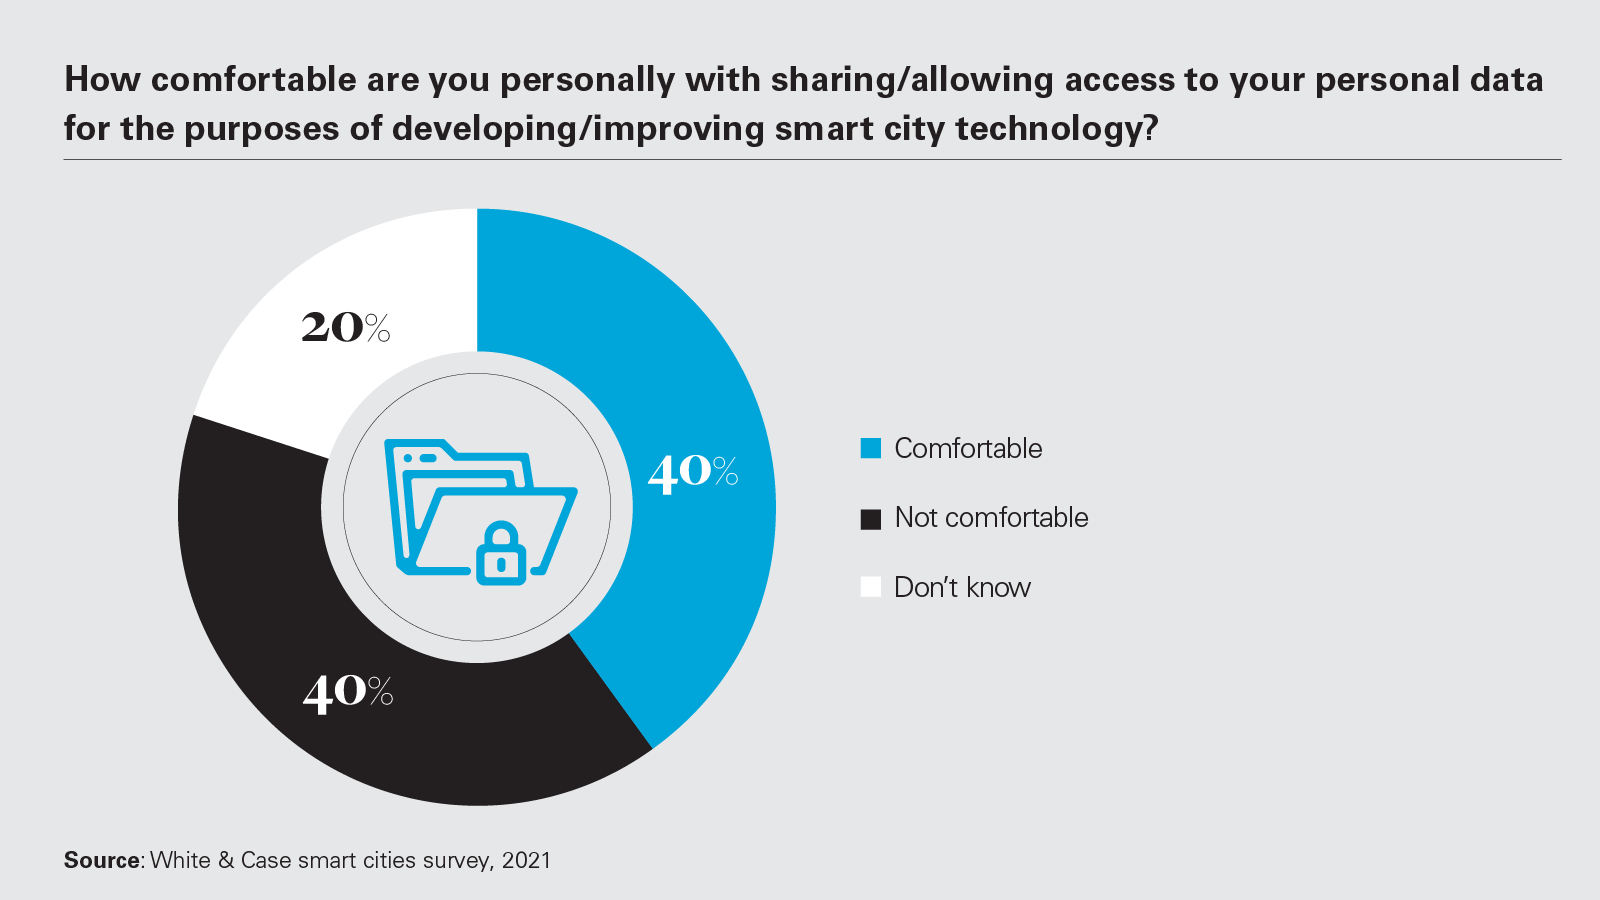 How comfortable are you personally with sharing/allowing access to your personal data for the purposes of developing/improving smart city technology?